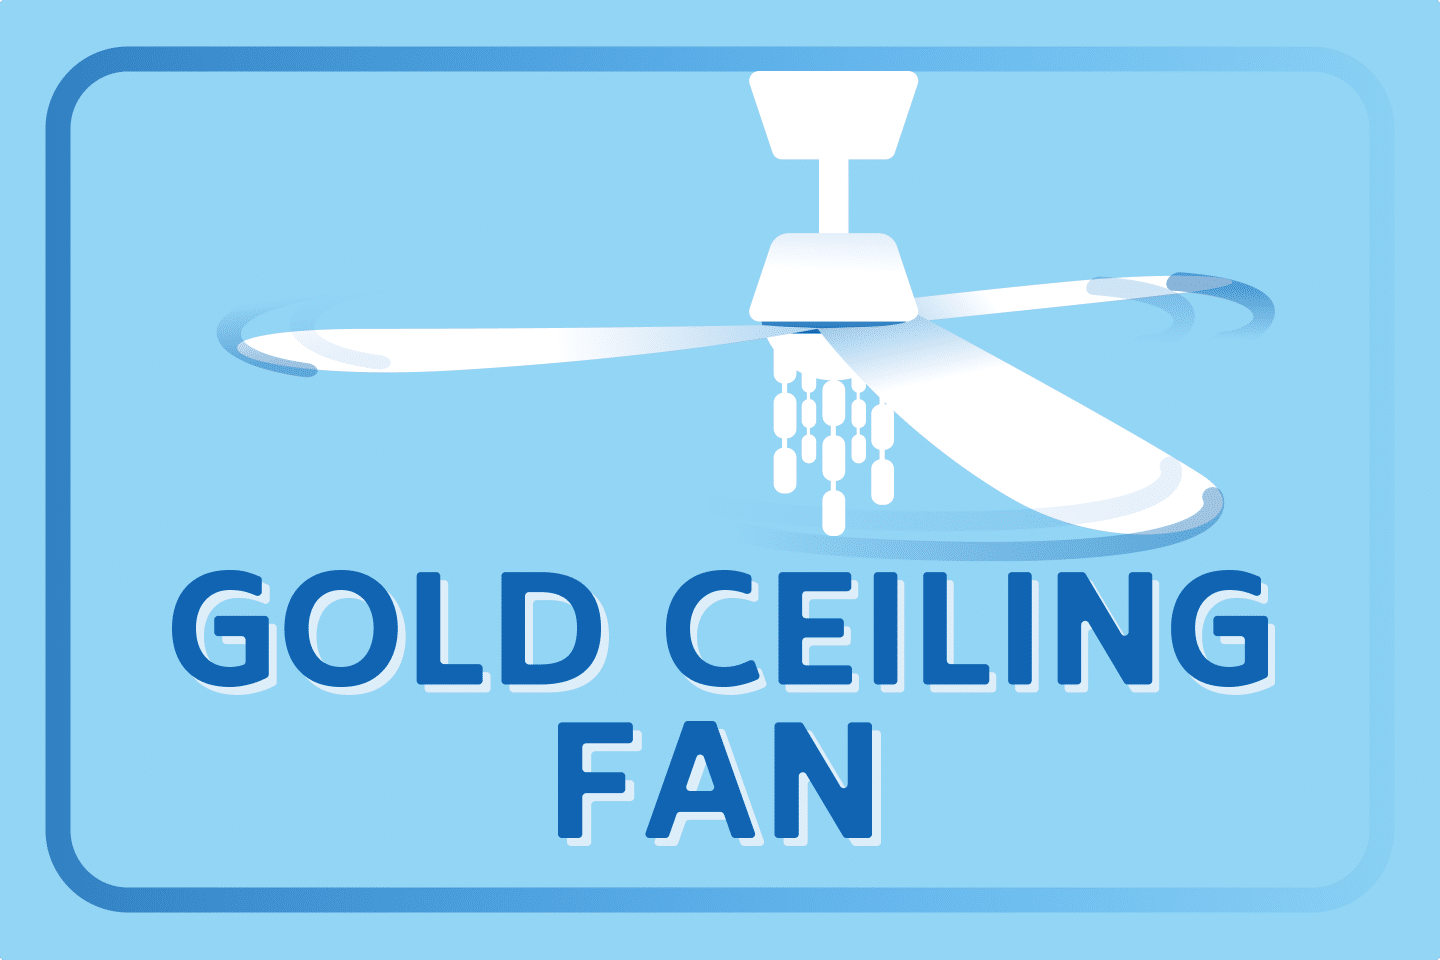 Best Gold Ceiling Fans: 10 Amazing Options You’ll Love